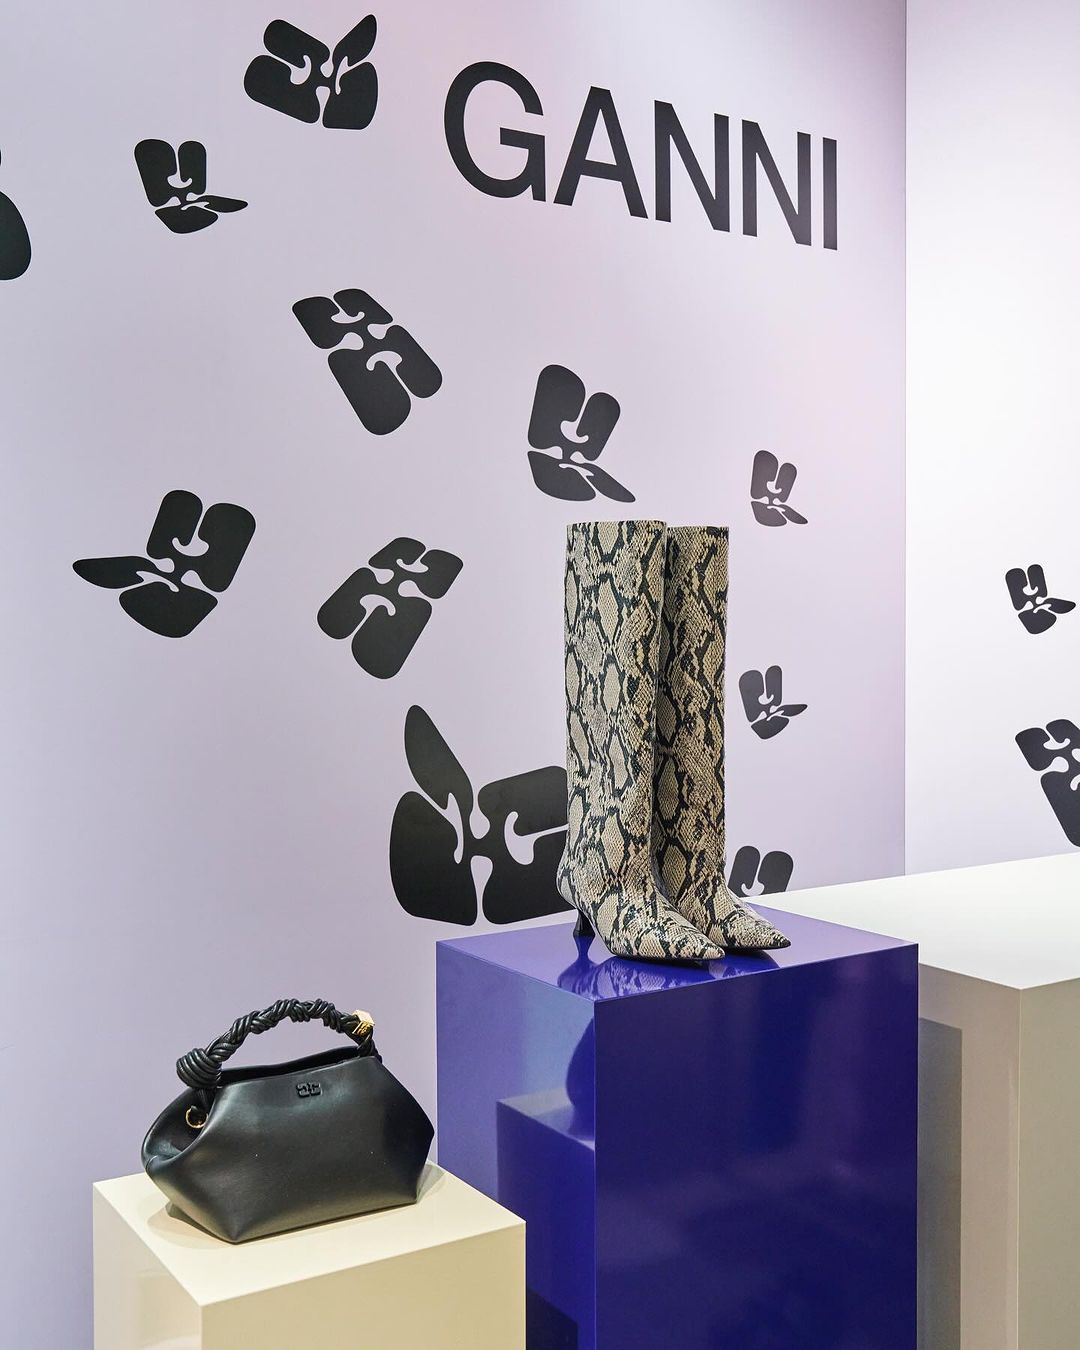 Ganni Opens Monthlong Pop-up Shop at Nordstrom's NYC Flagship – WWD